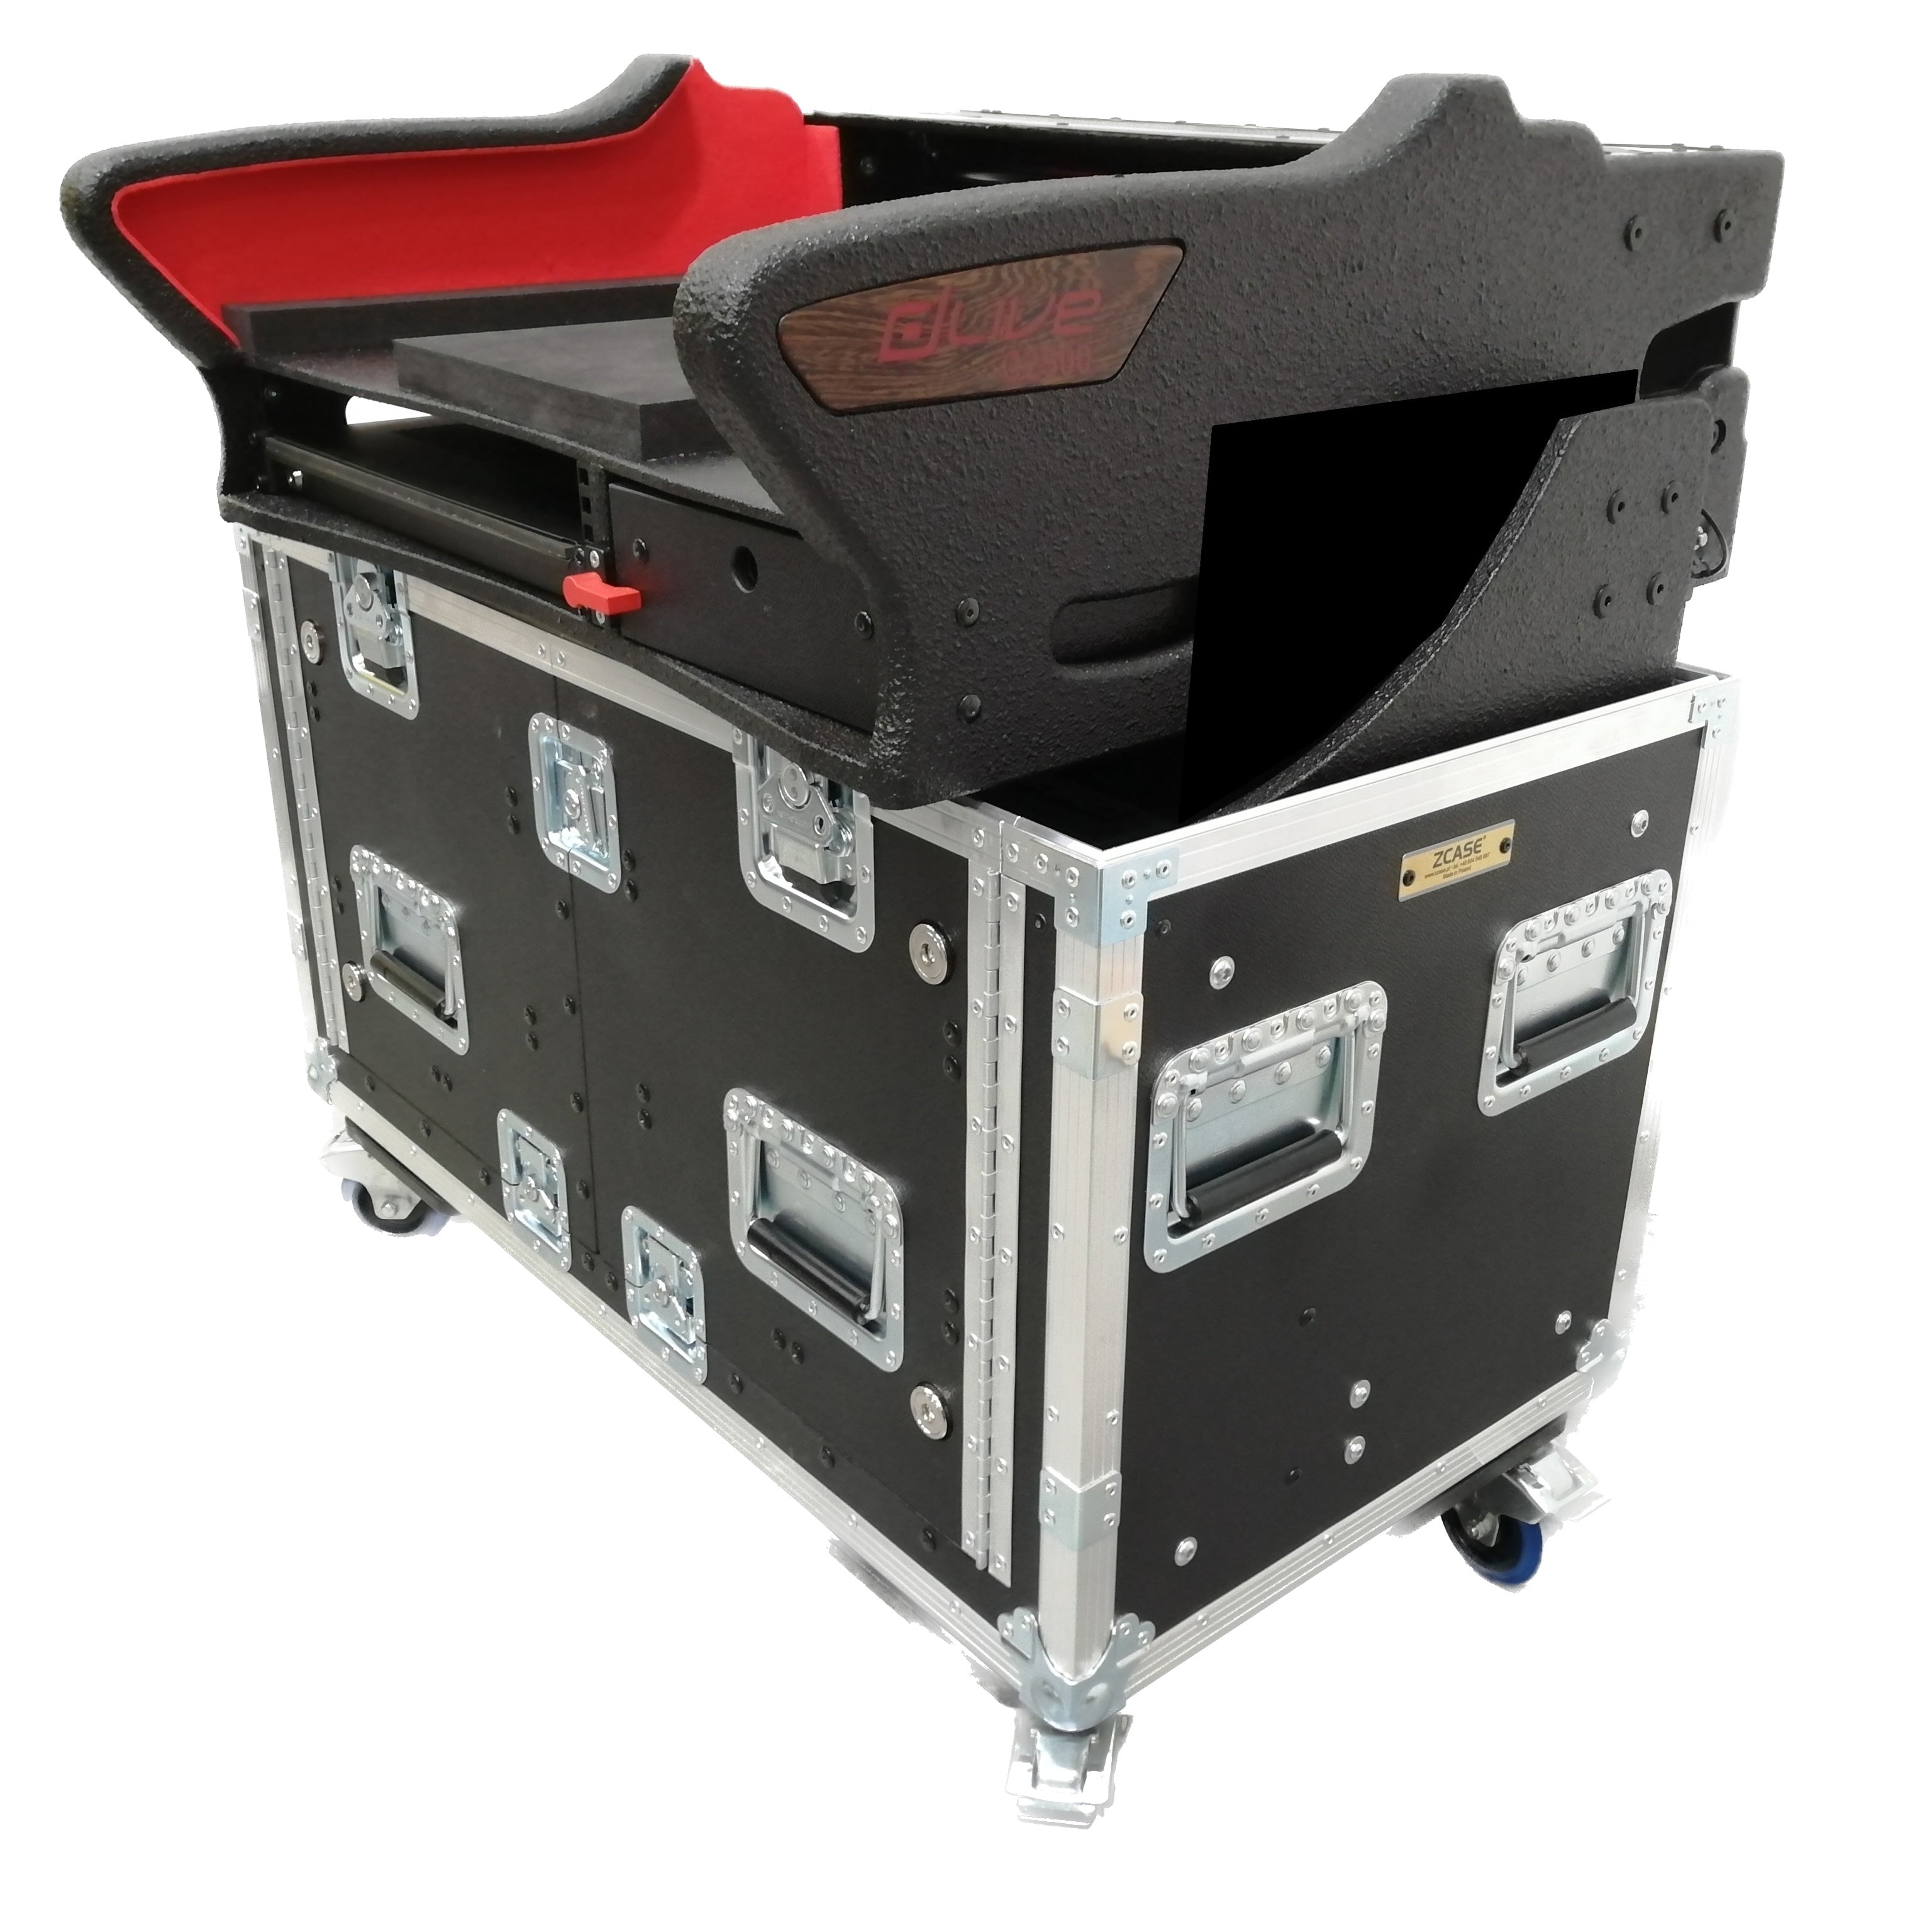 Pro X For Allen and Heath DLive C2500 Flip-Ready Hydraulic Console Easy Retracting Lifting Detachable Case by ZCASE XZF-AH-C2500 D